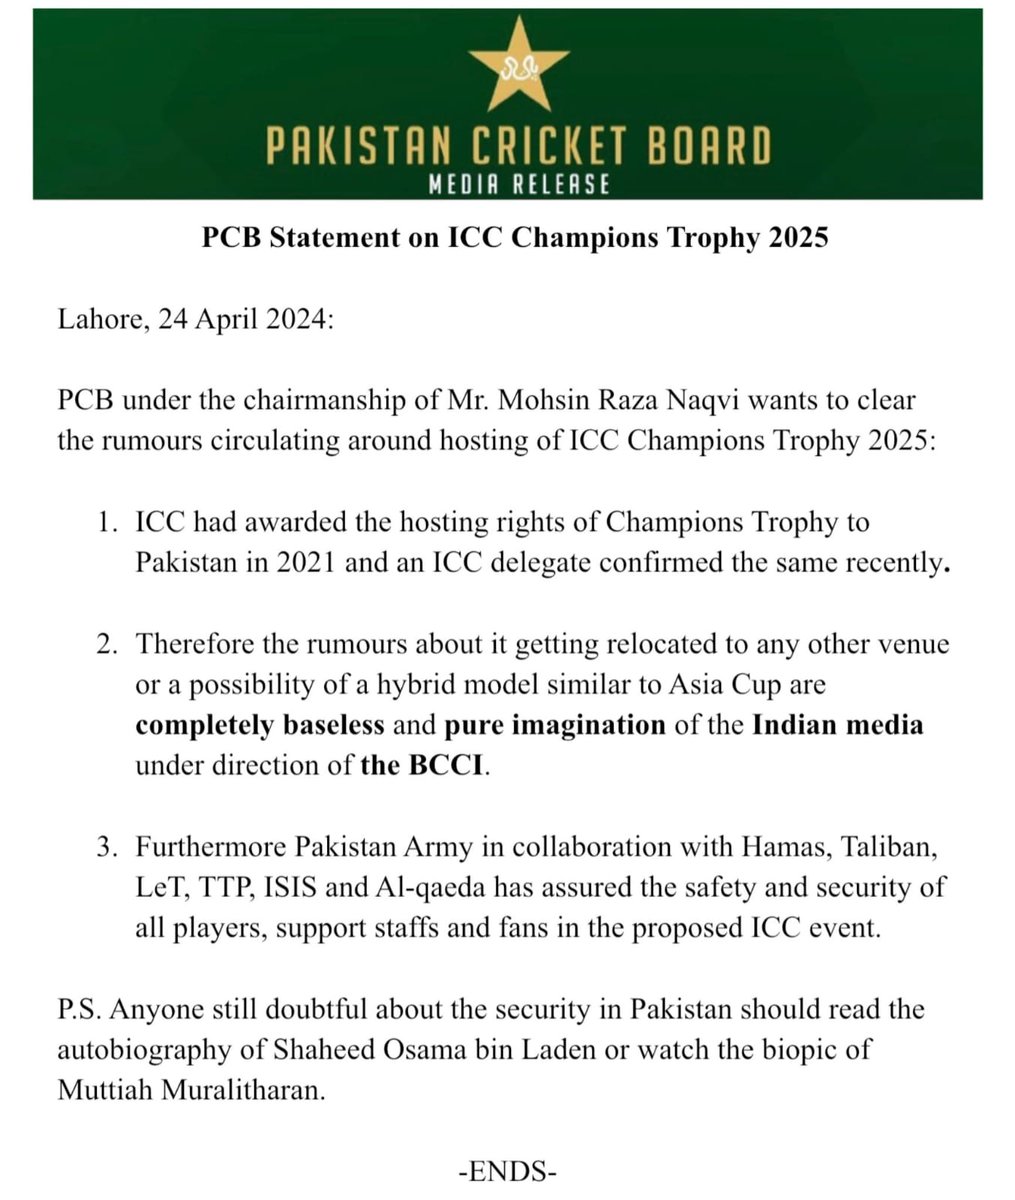 The PCB under the chairmanship of Mr. Mohsin Raza Naqvi wants to clear the rumours circulating around hosting of ICC Champions Trophy 2025 in Pakistan:

#CT25 | #PAKvNZ | #PakistanCricket